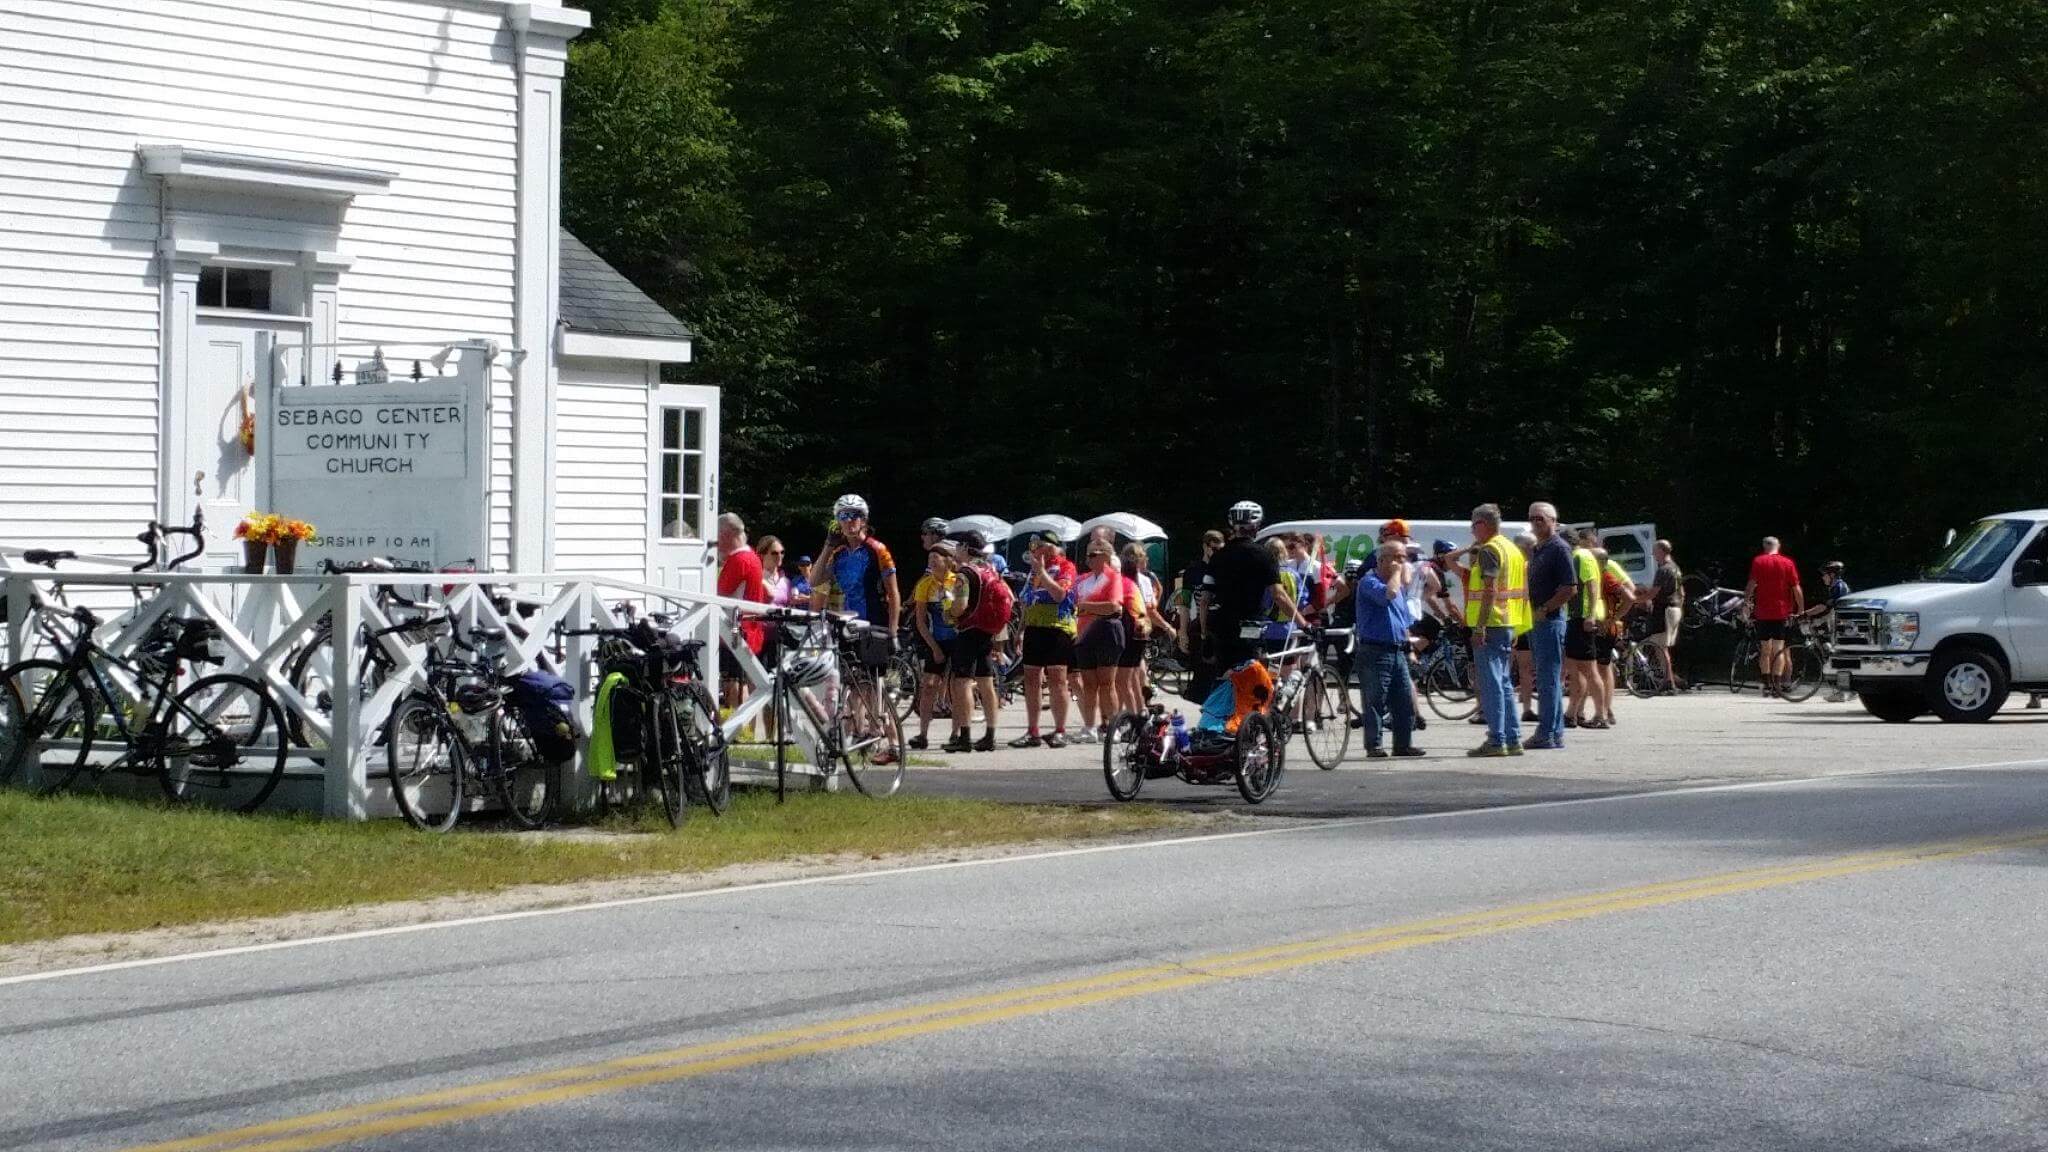 Lunch stop at the Sebago Center Community Church